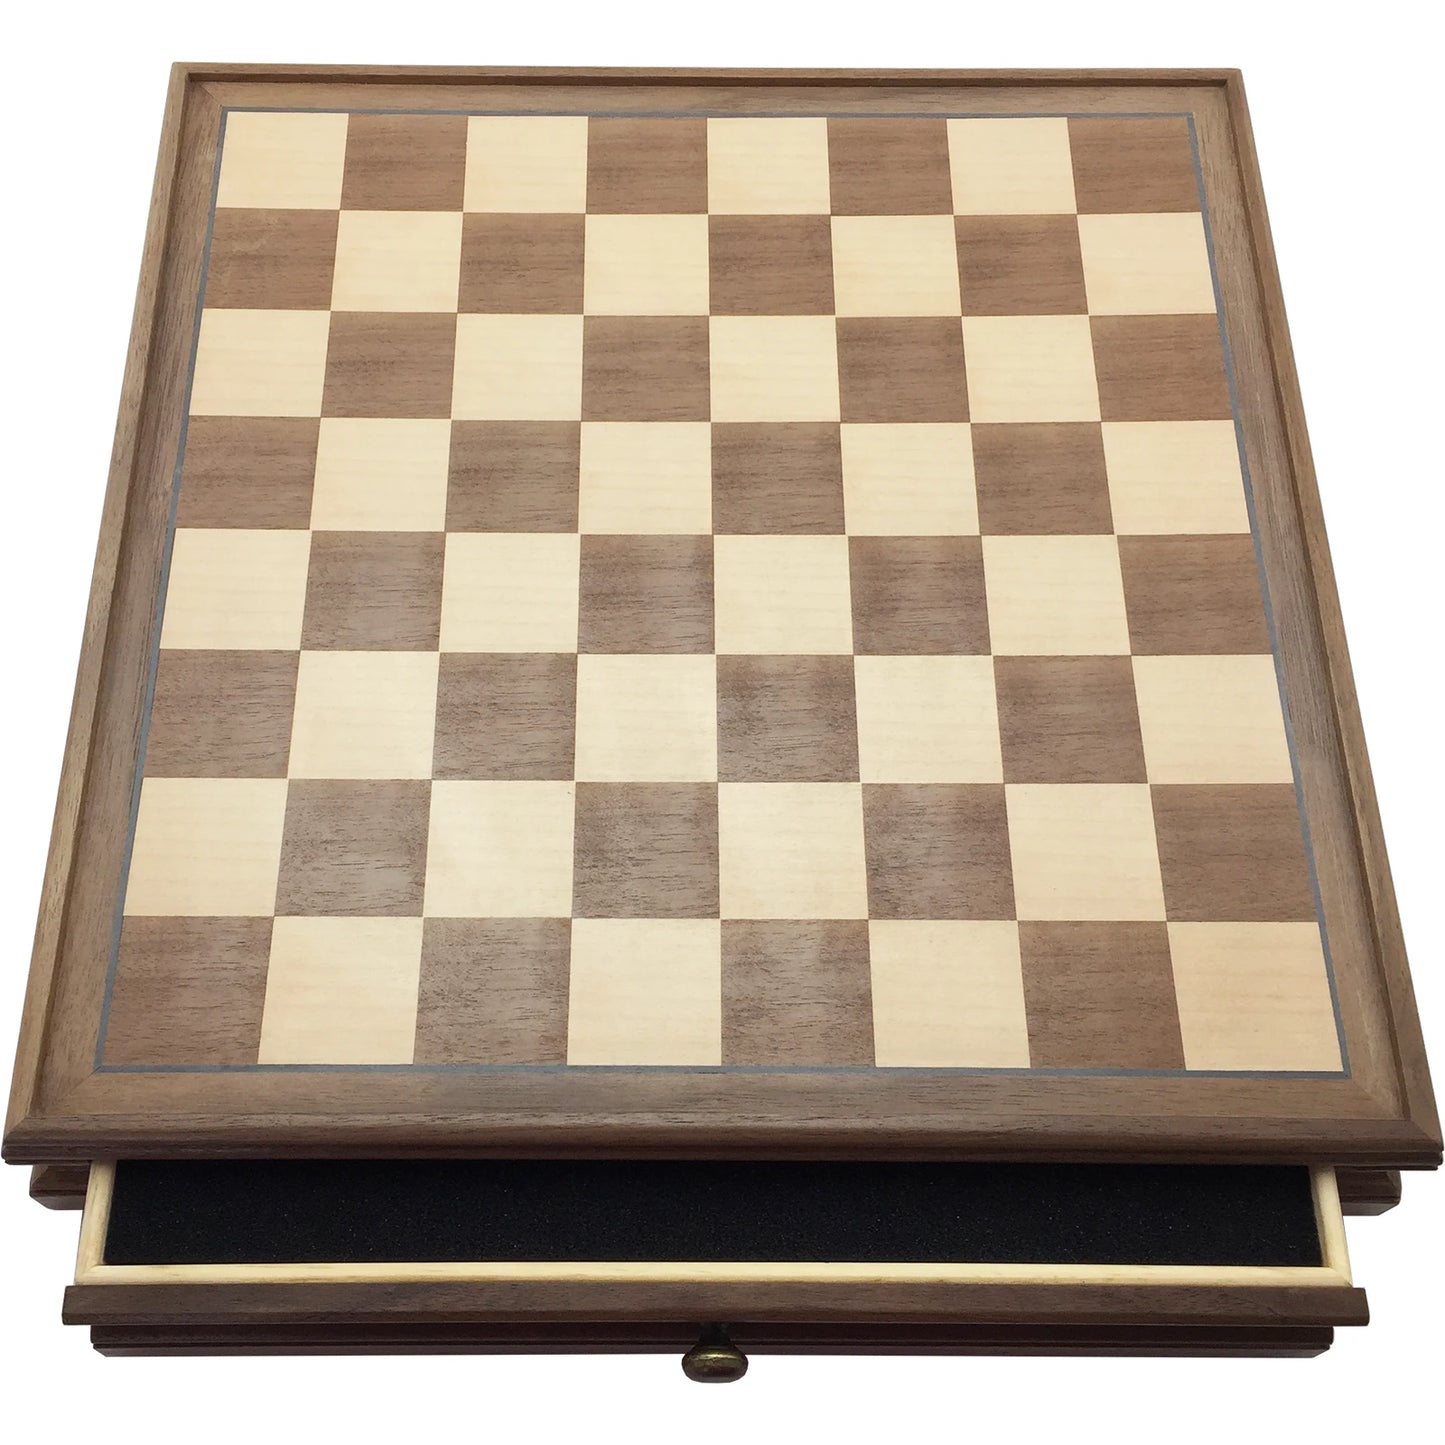 Wood chess board with drawers open.